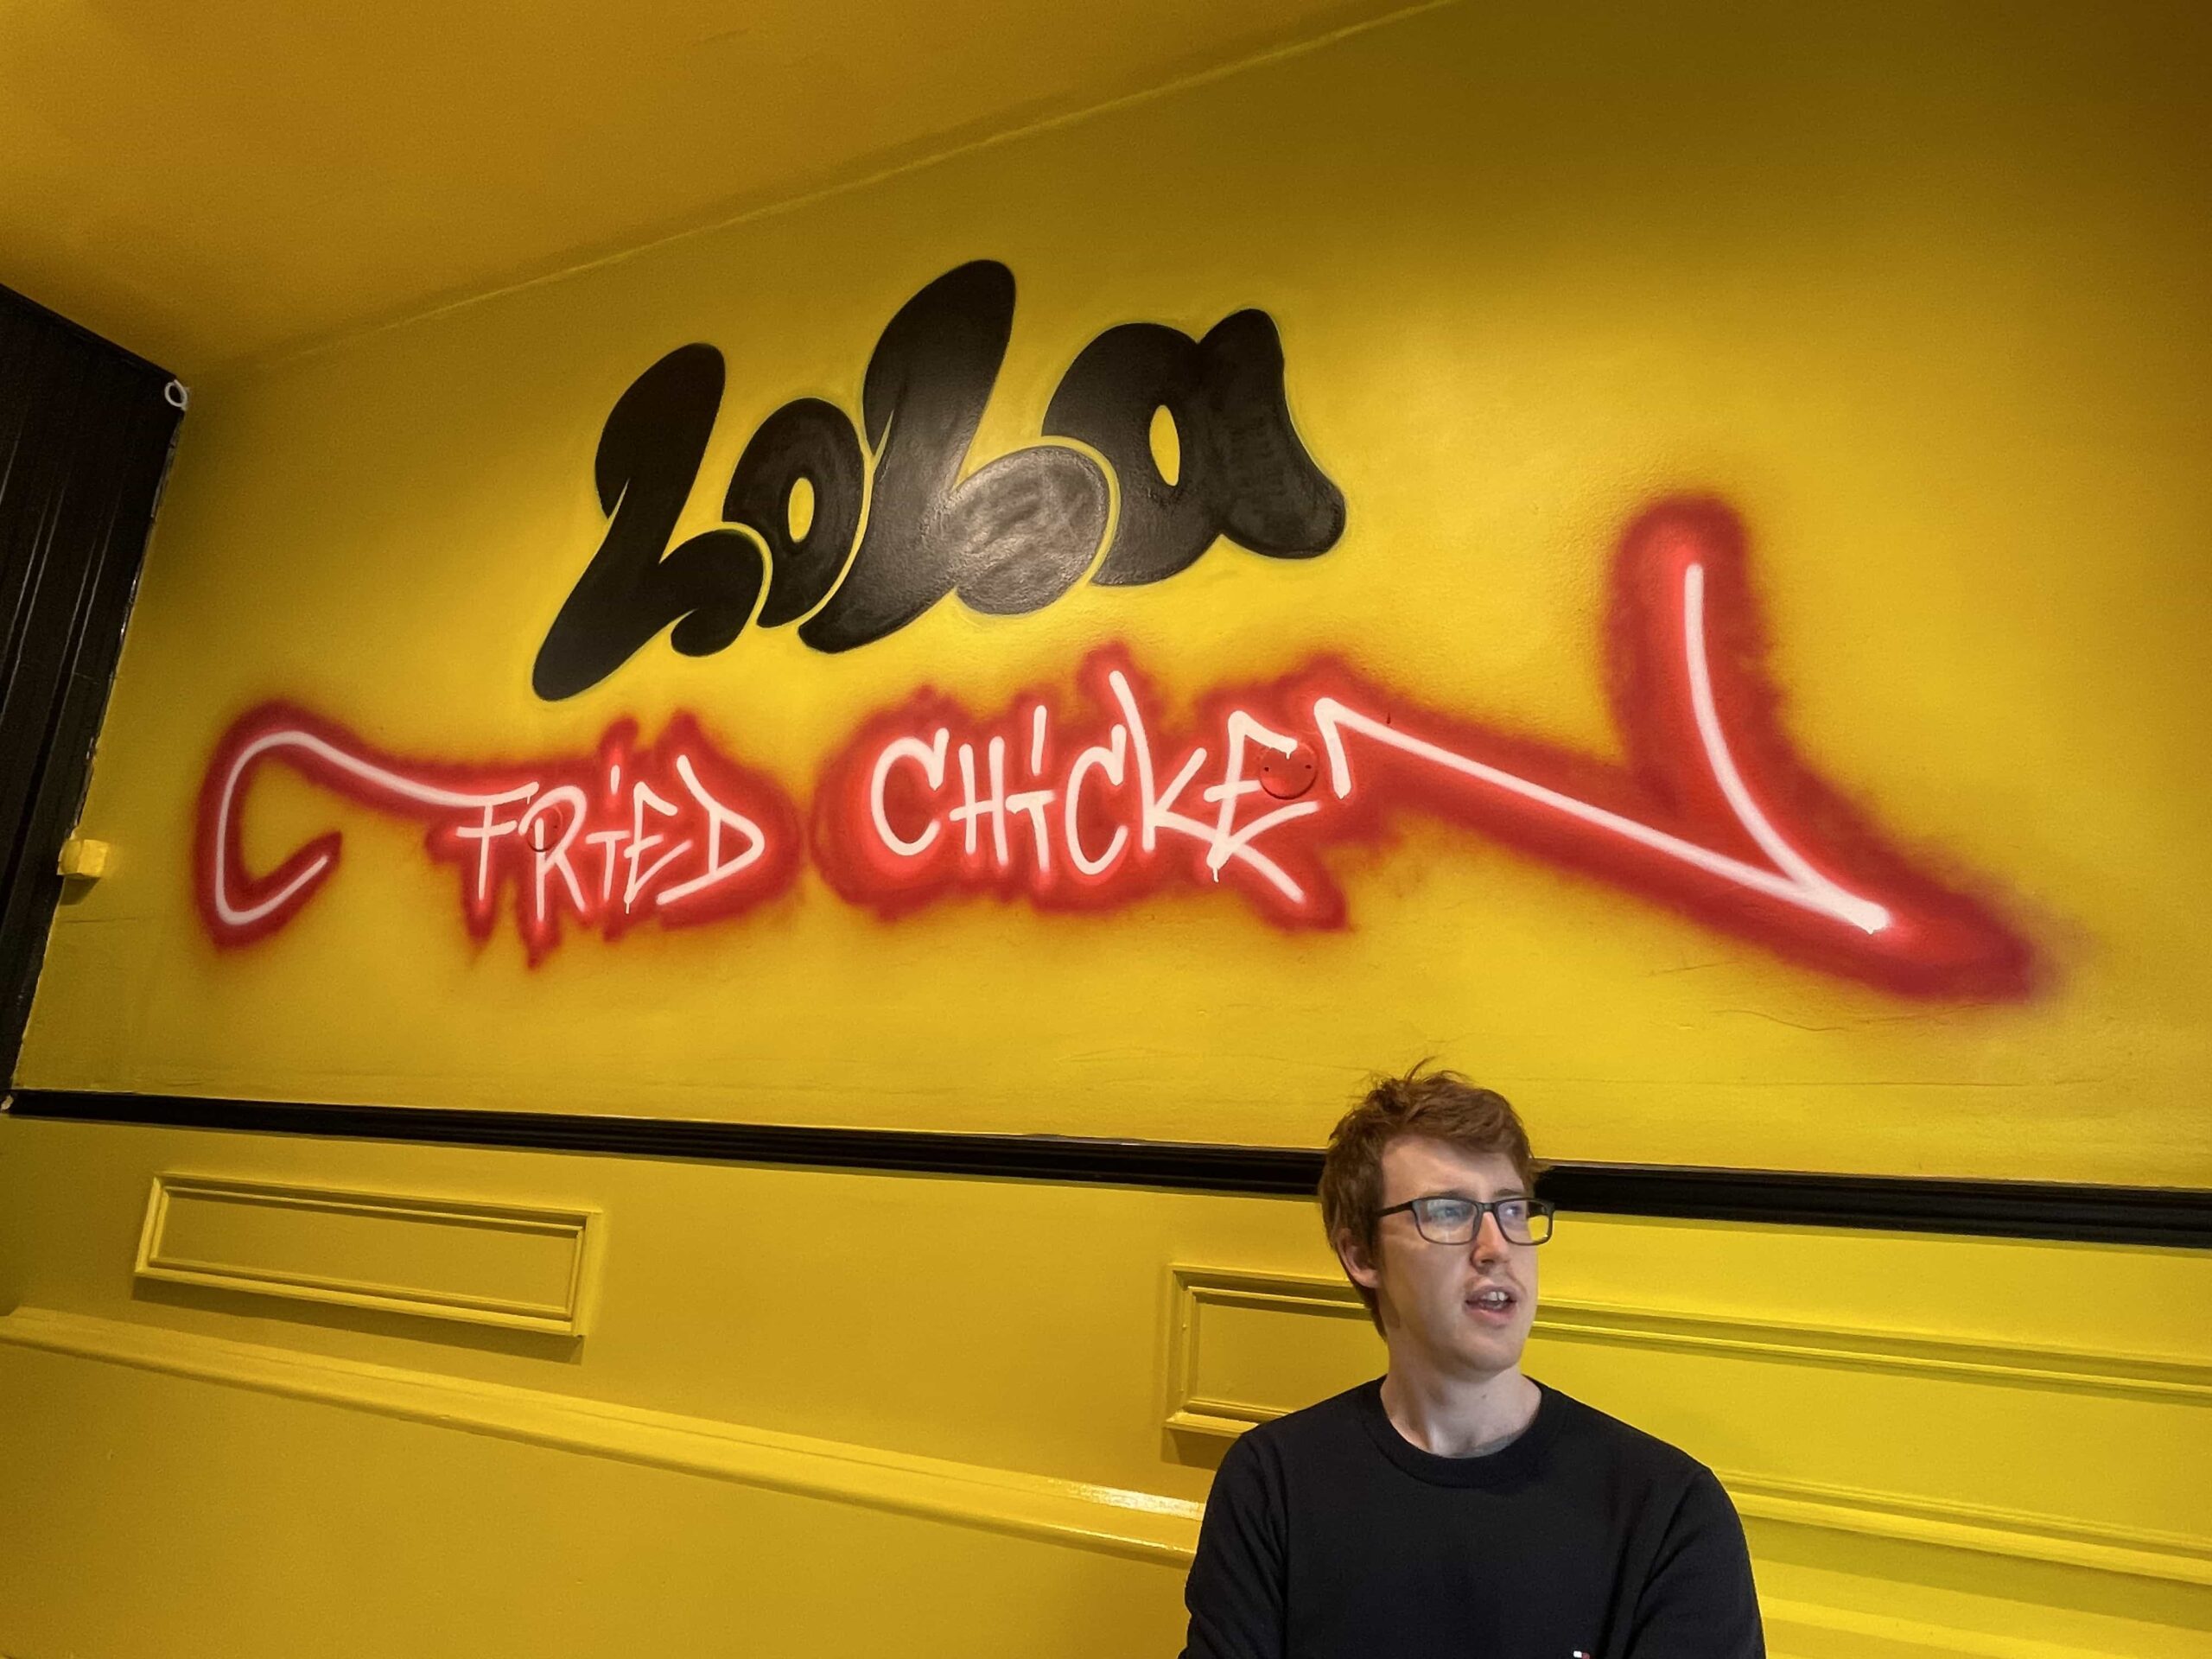 lola fried chicken on the wall